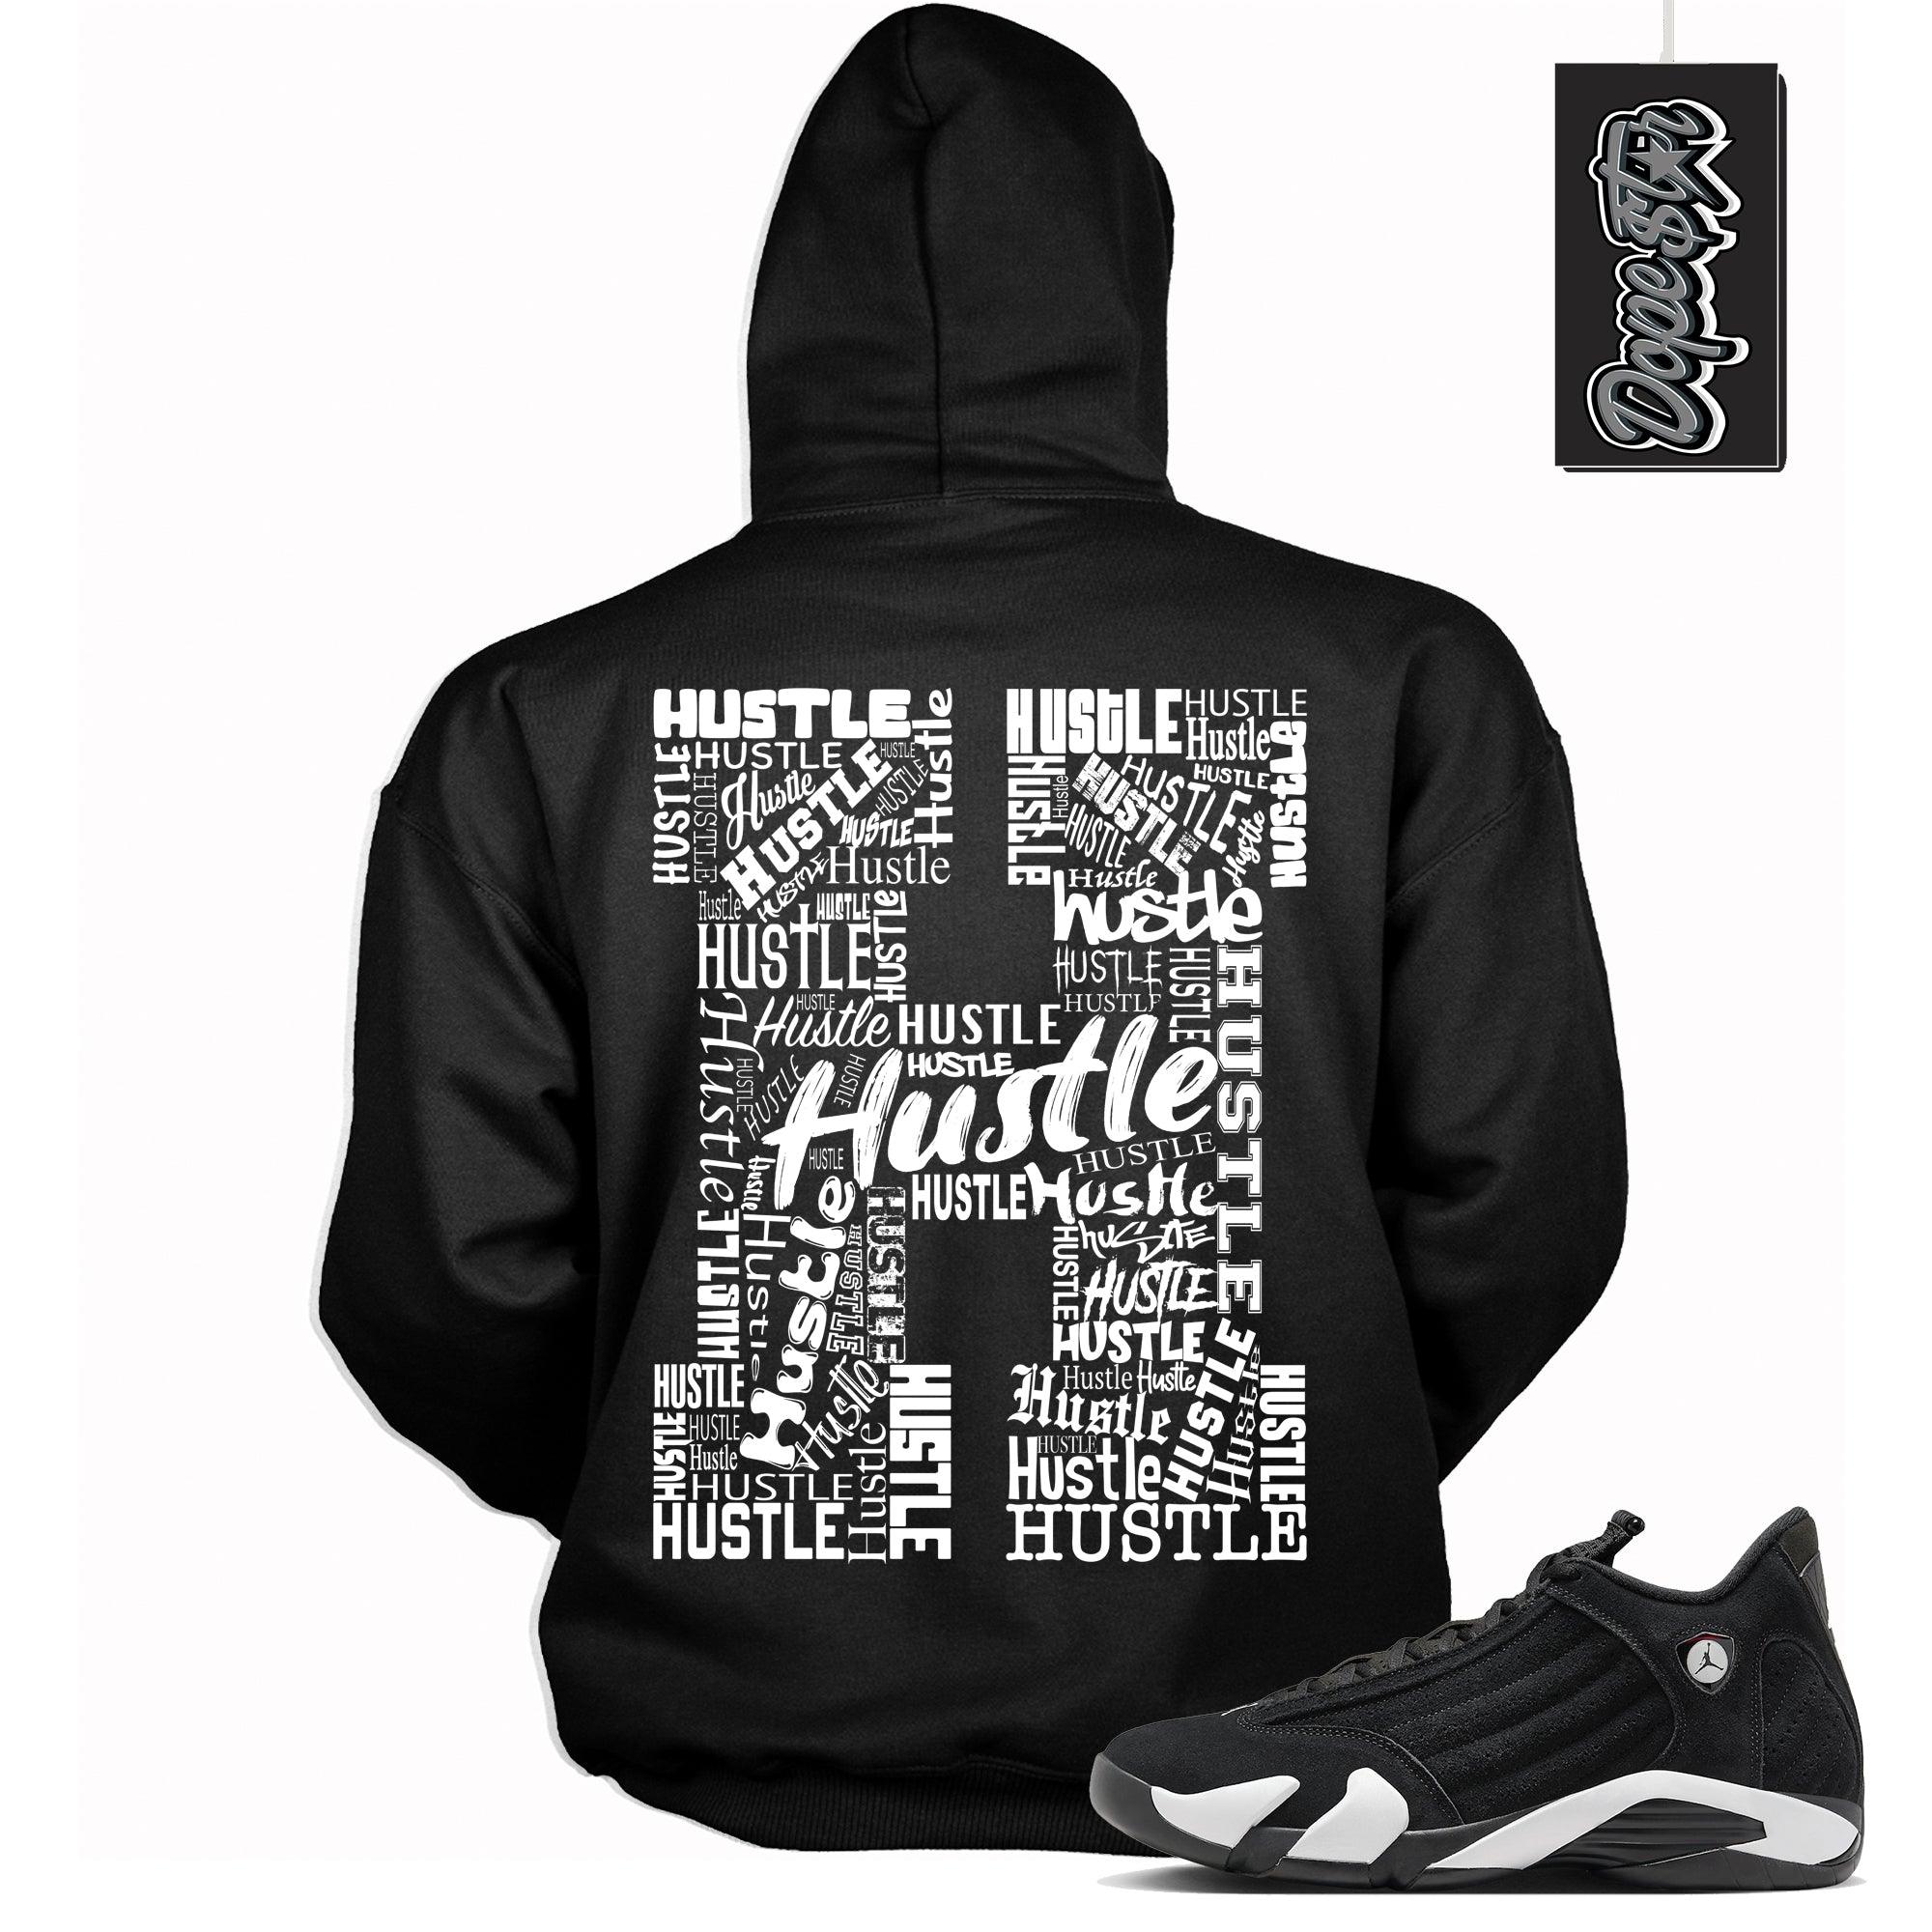 Cool Black Graphic Hoodie with “ Hustle H “ print, that perfectly matches Air Jordan 14 Black & White  sneakers